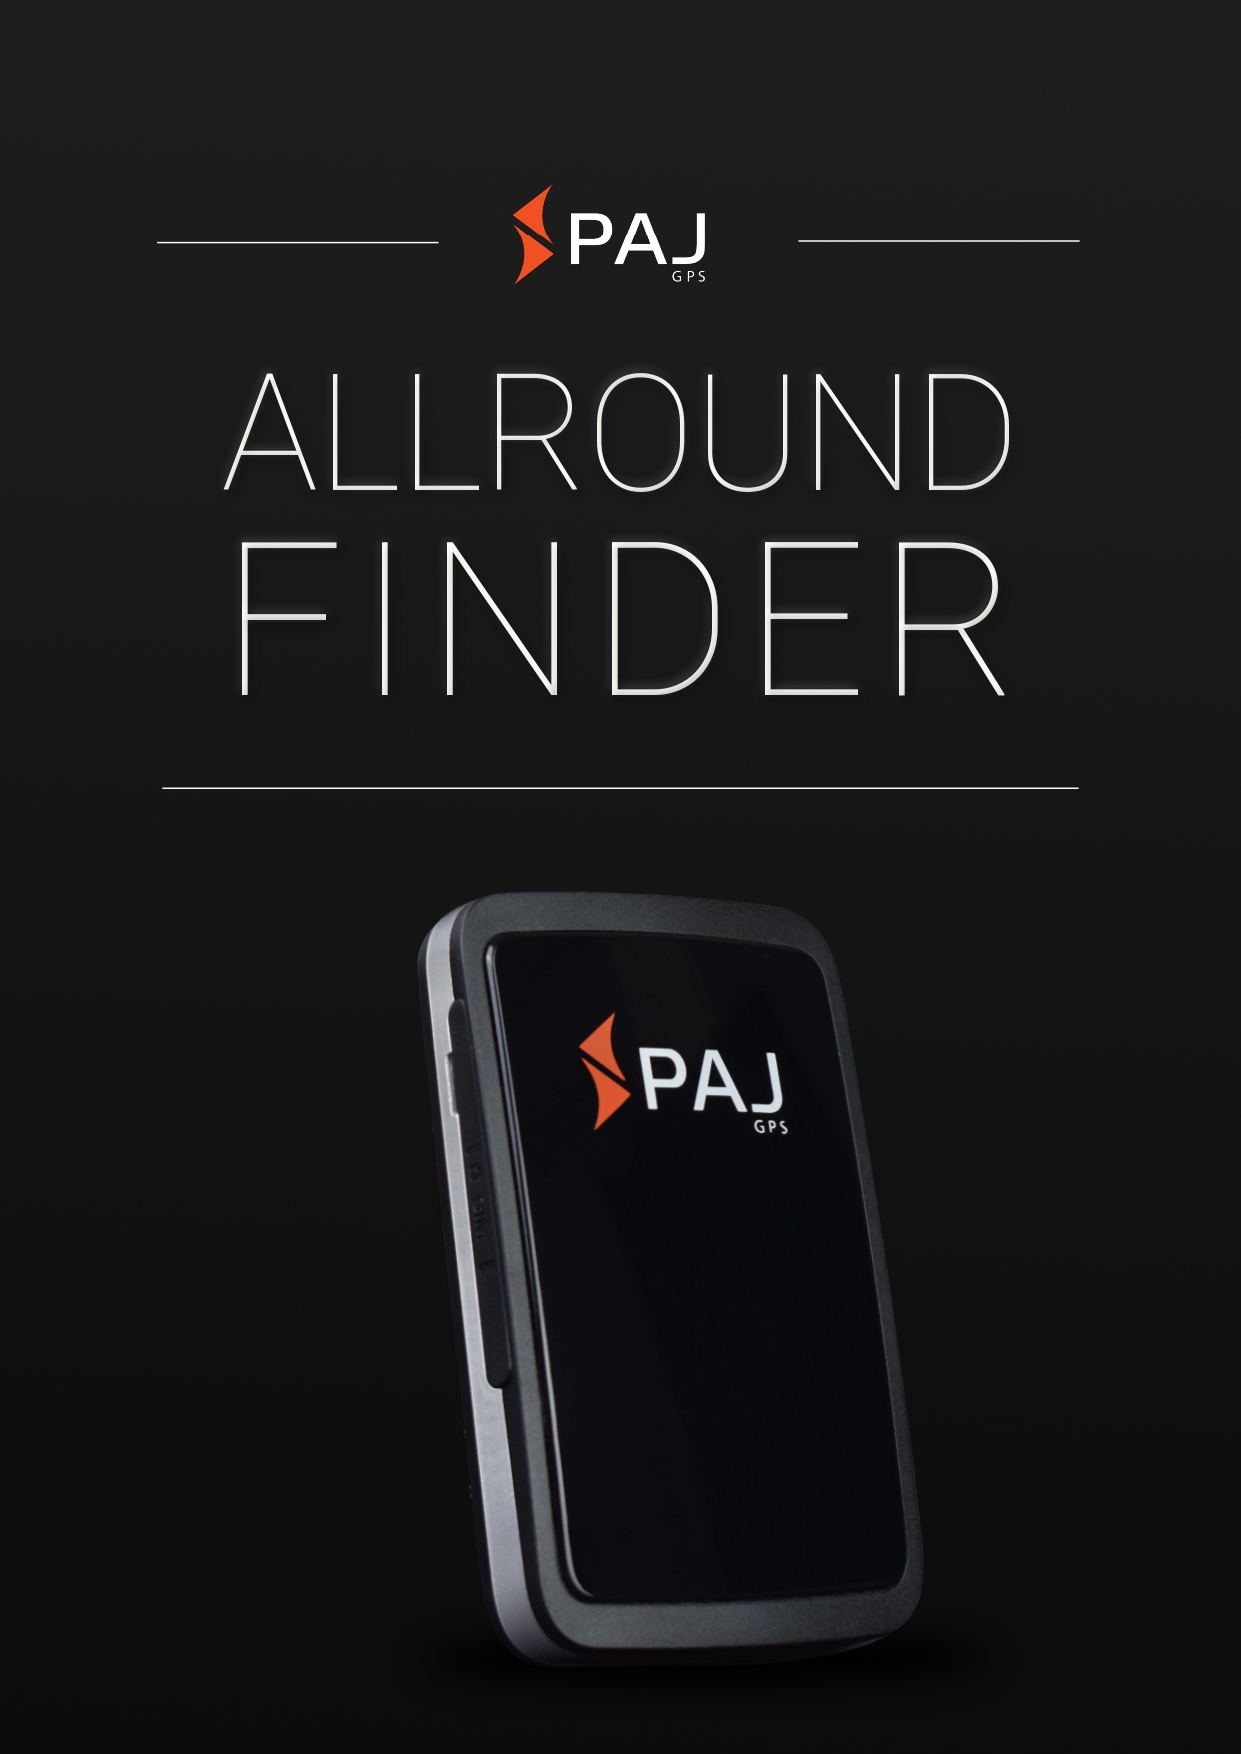 Thumbnail manual ALLROUND Finder 2.0 GPS Tracker from PAJ